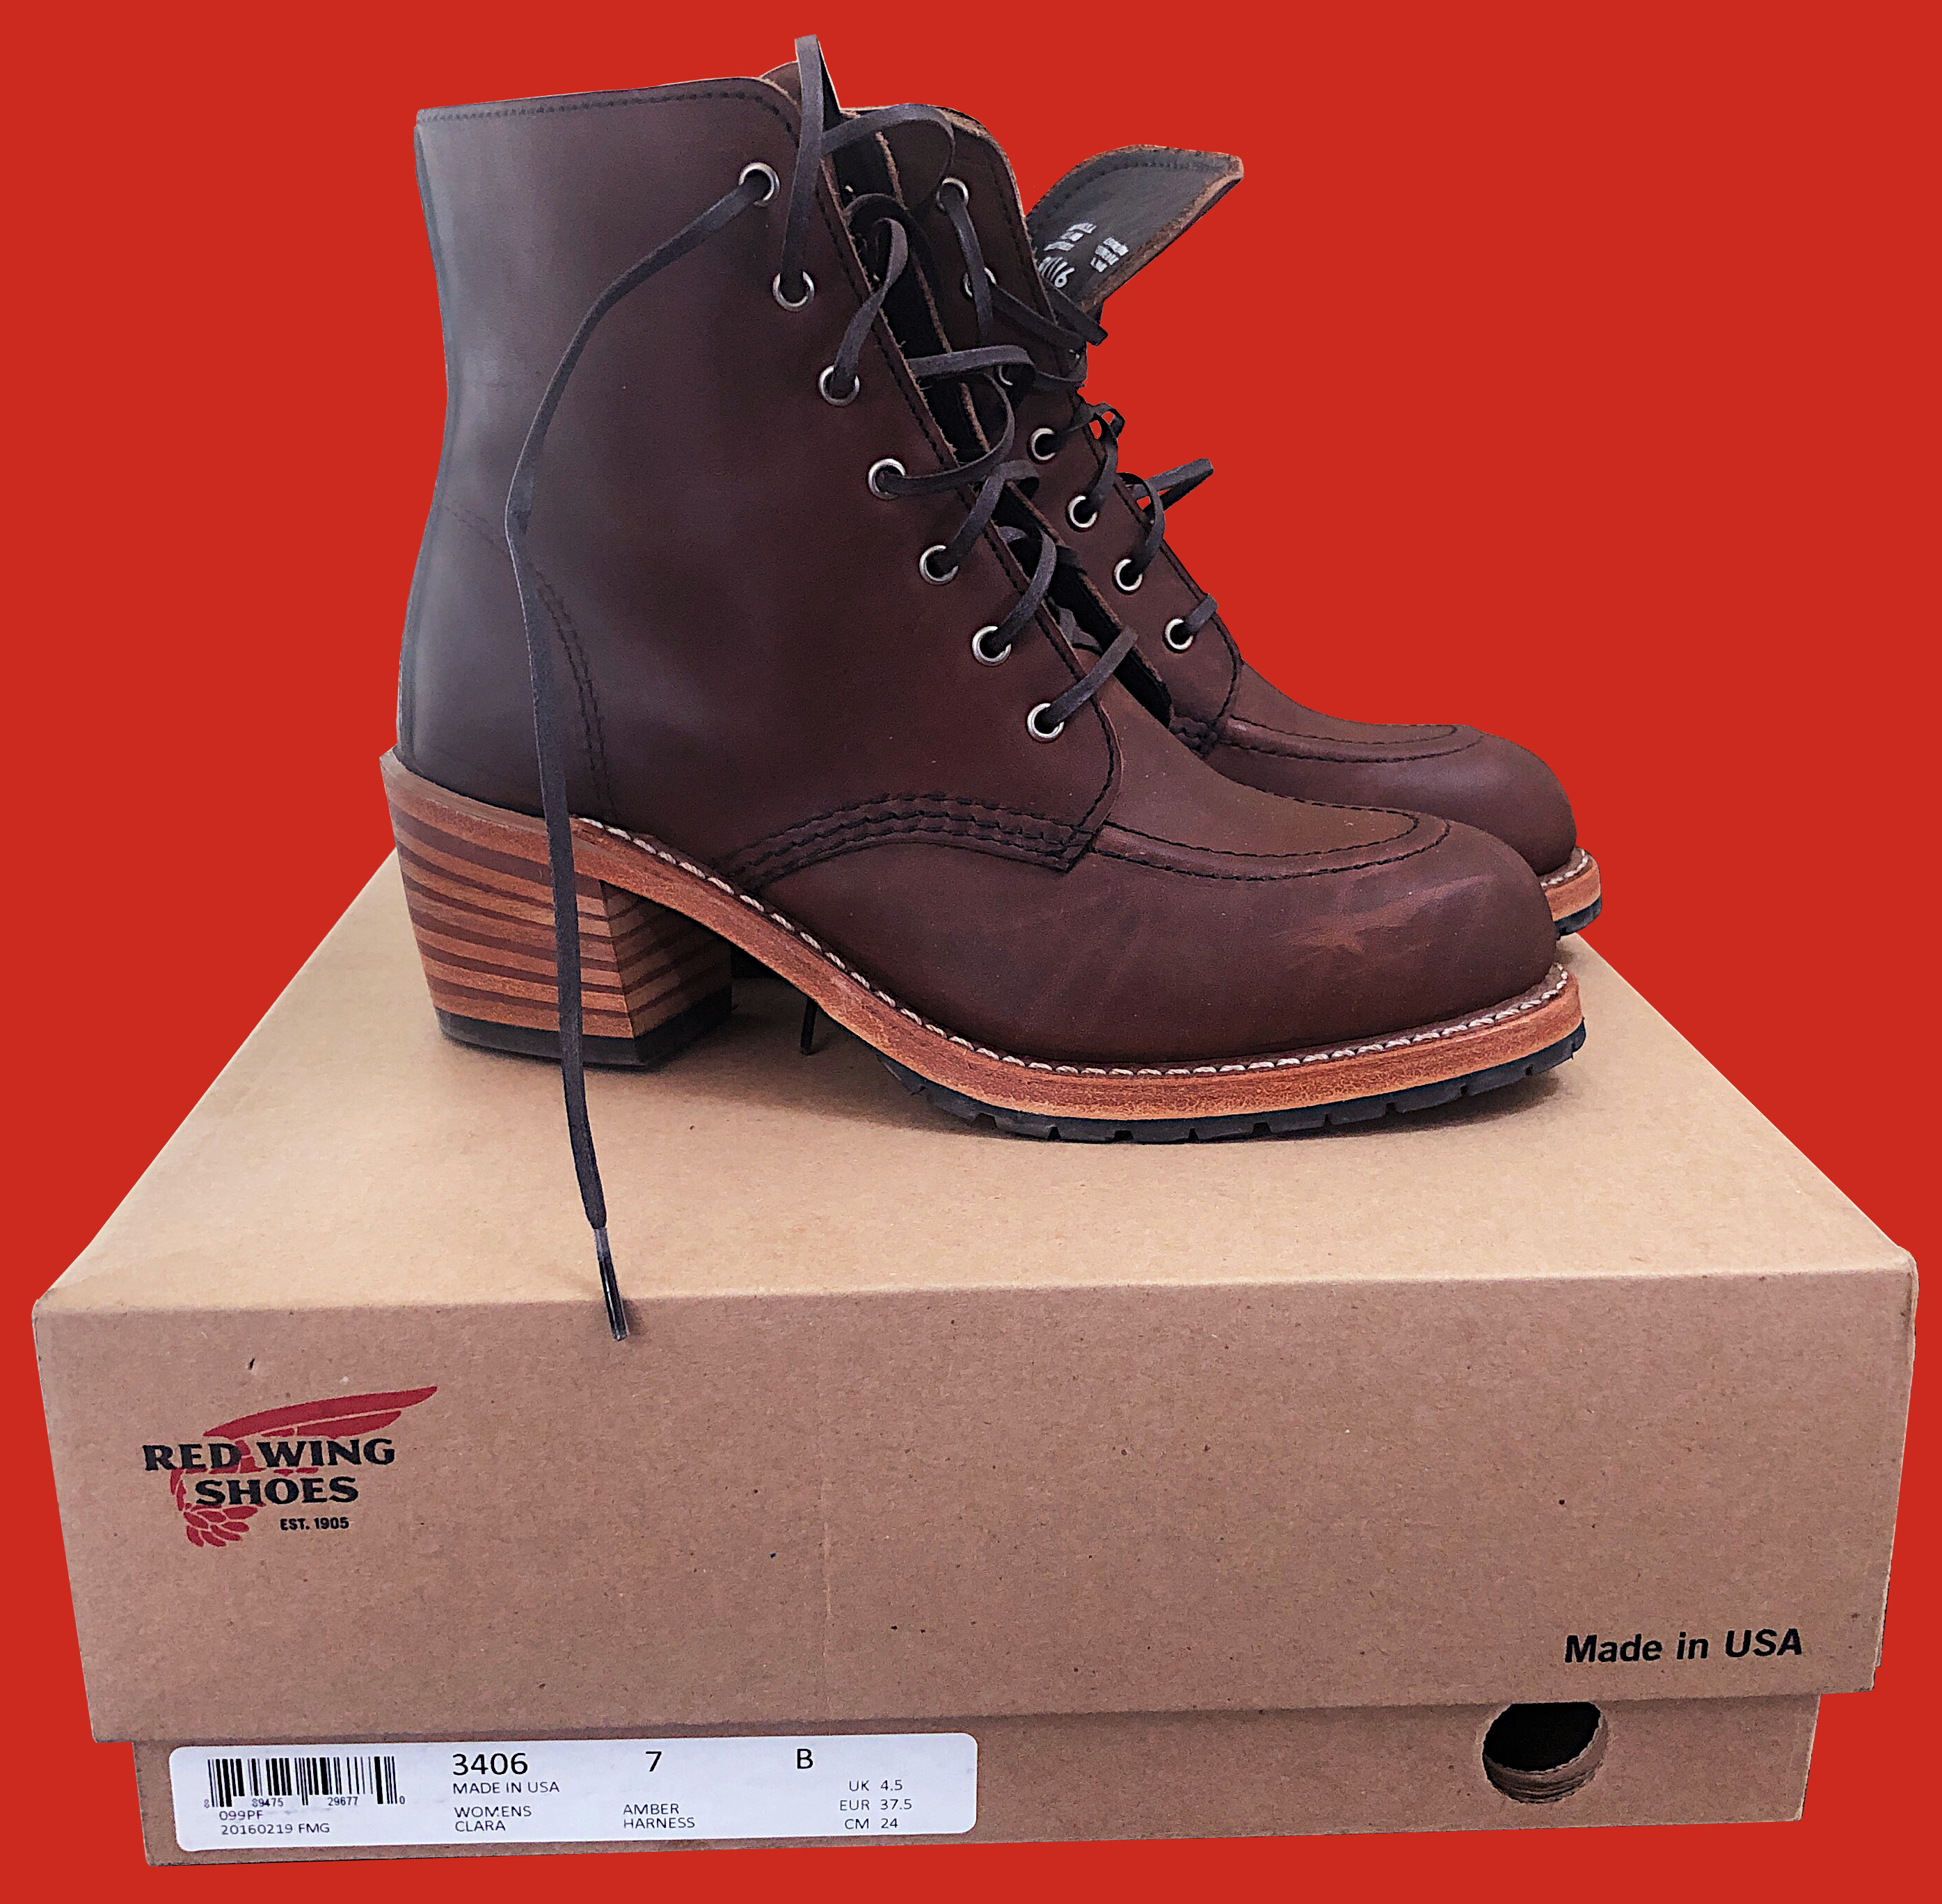 red wings shoes boots